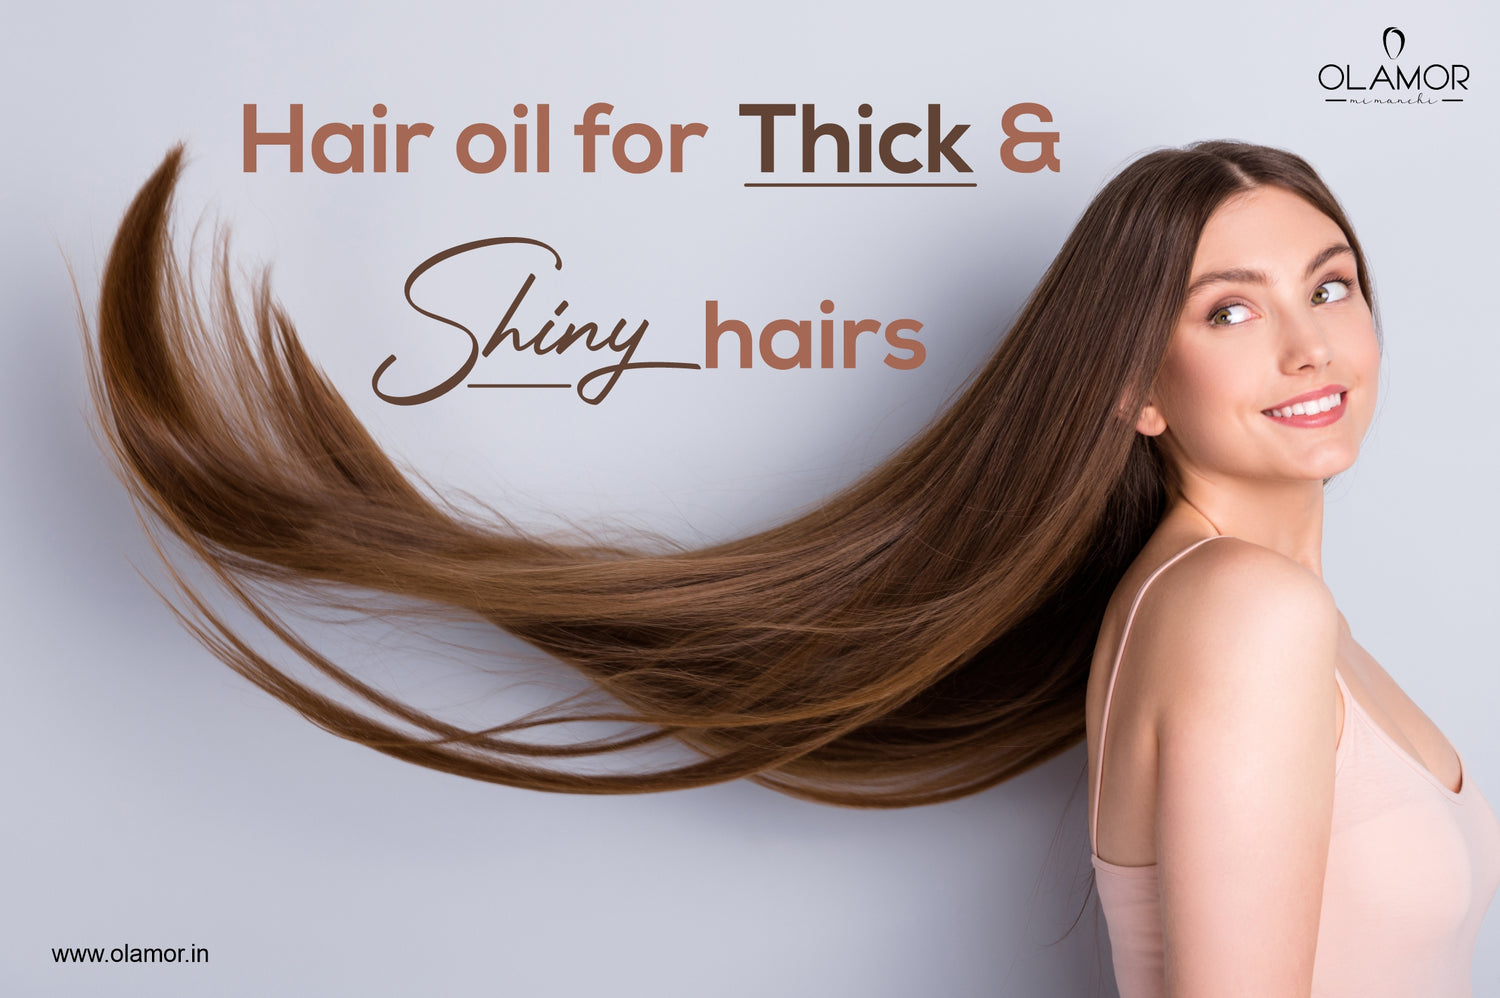 Hair oil for thick & shiny hairs